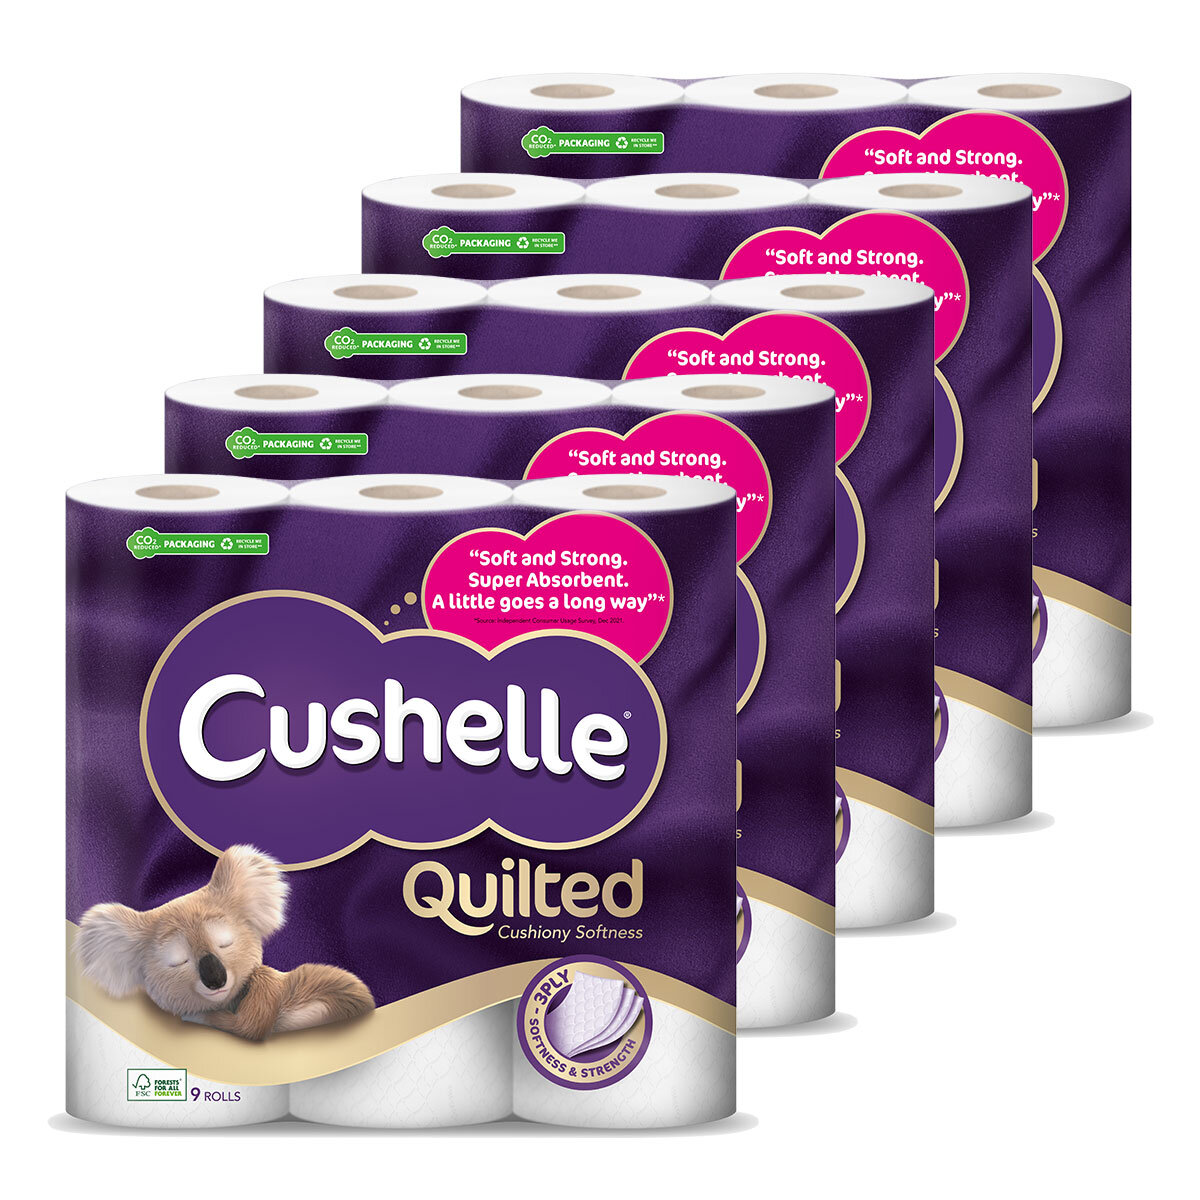 Cushelle Quilted 3-Ply Toilet Tissue, 45 Rolls Pallet Deal (36 Units)